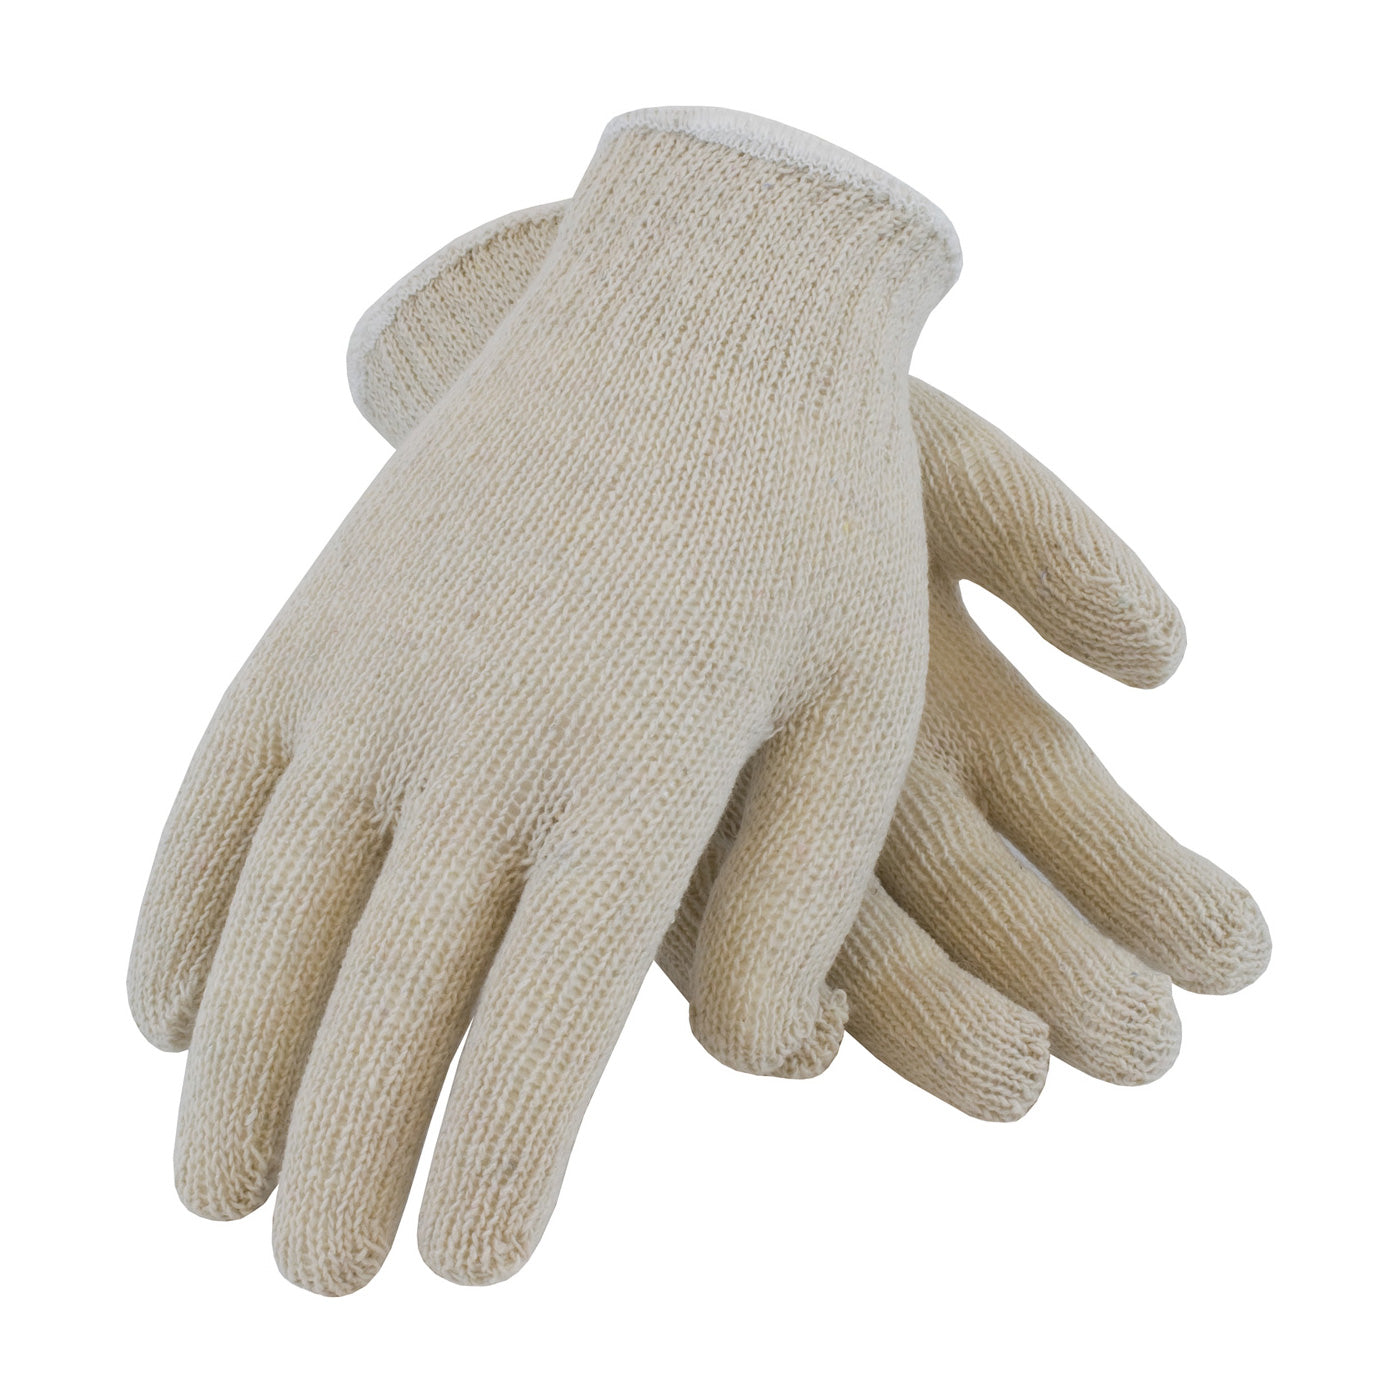 PIP 35-C103/L Economy Weight Seamless Knit Cotton/Polyester Glove - Natural